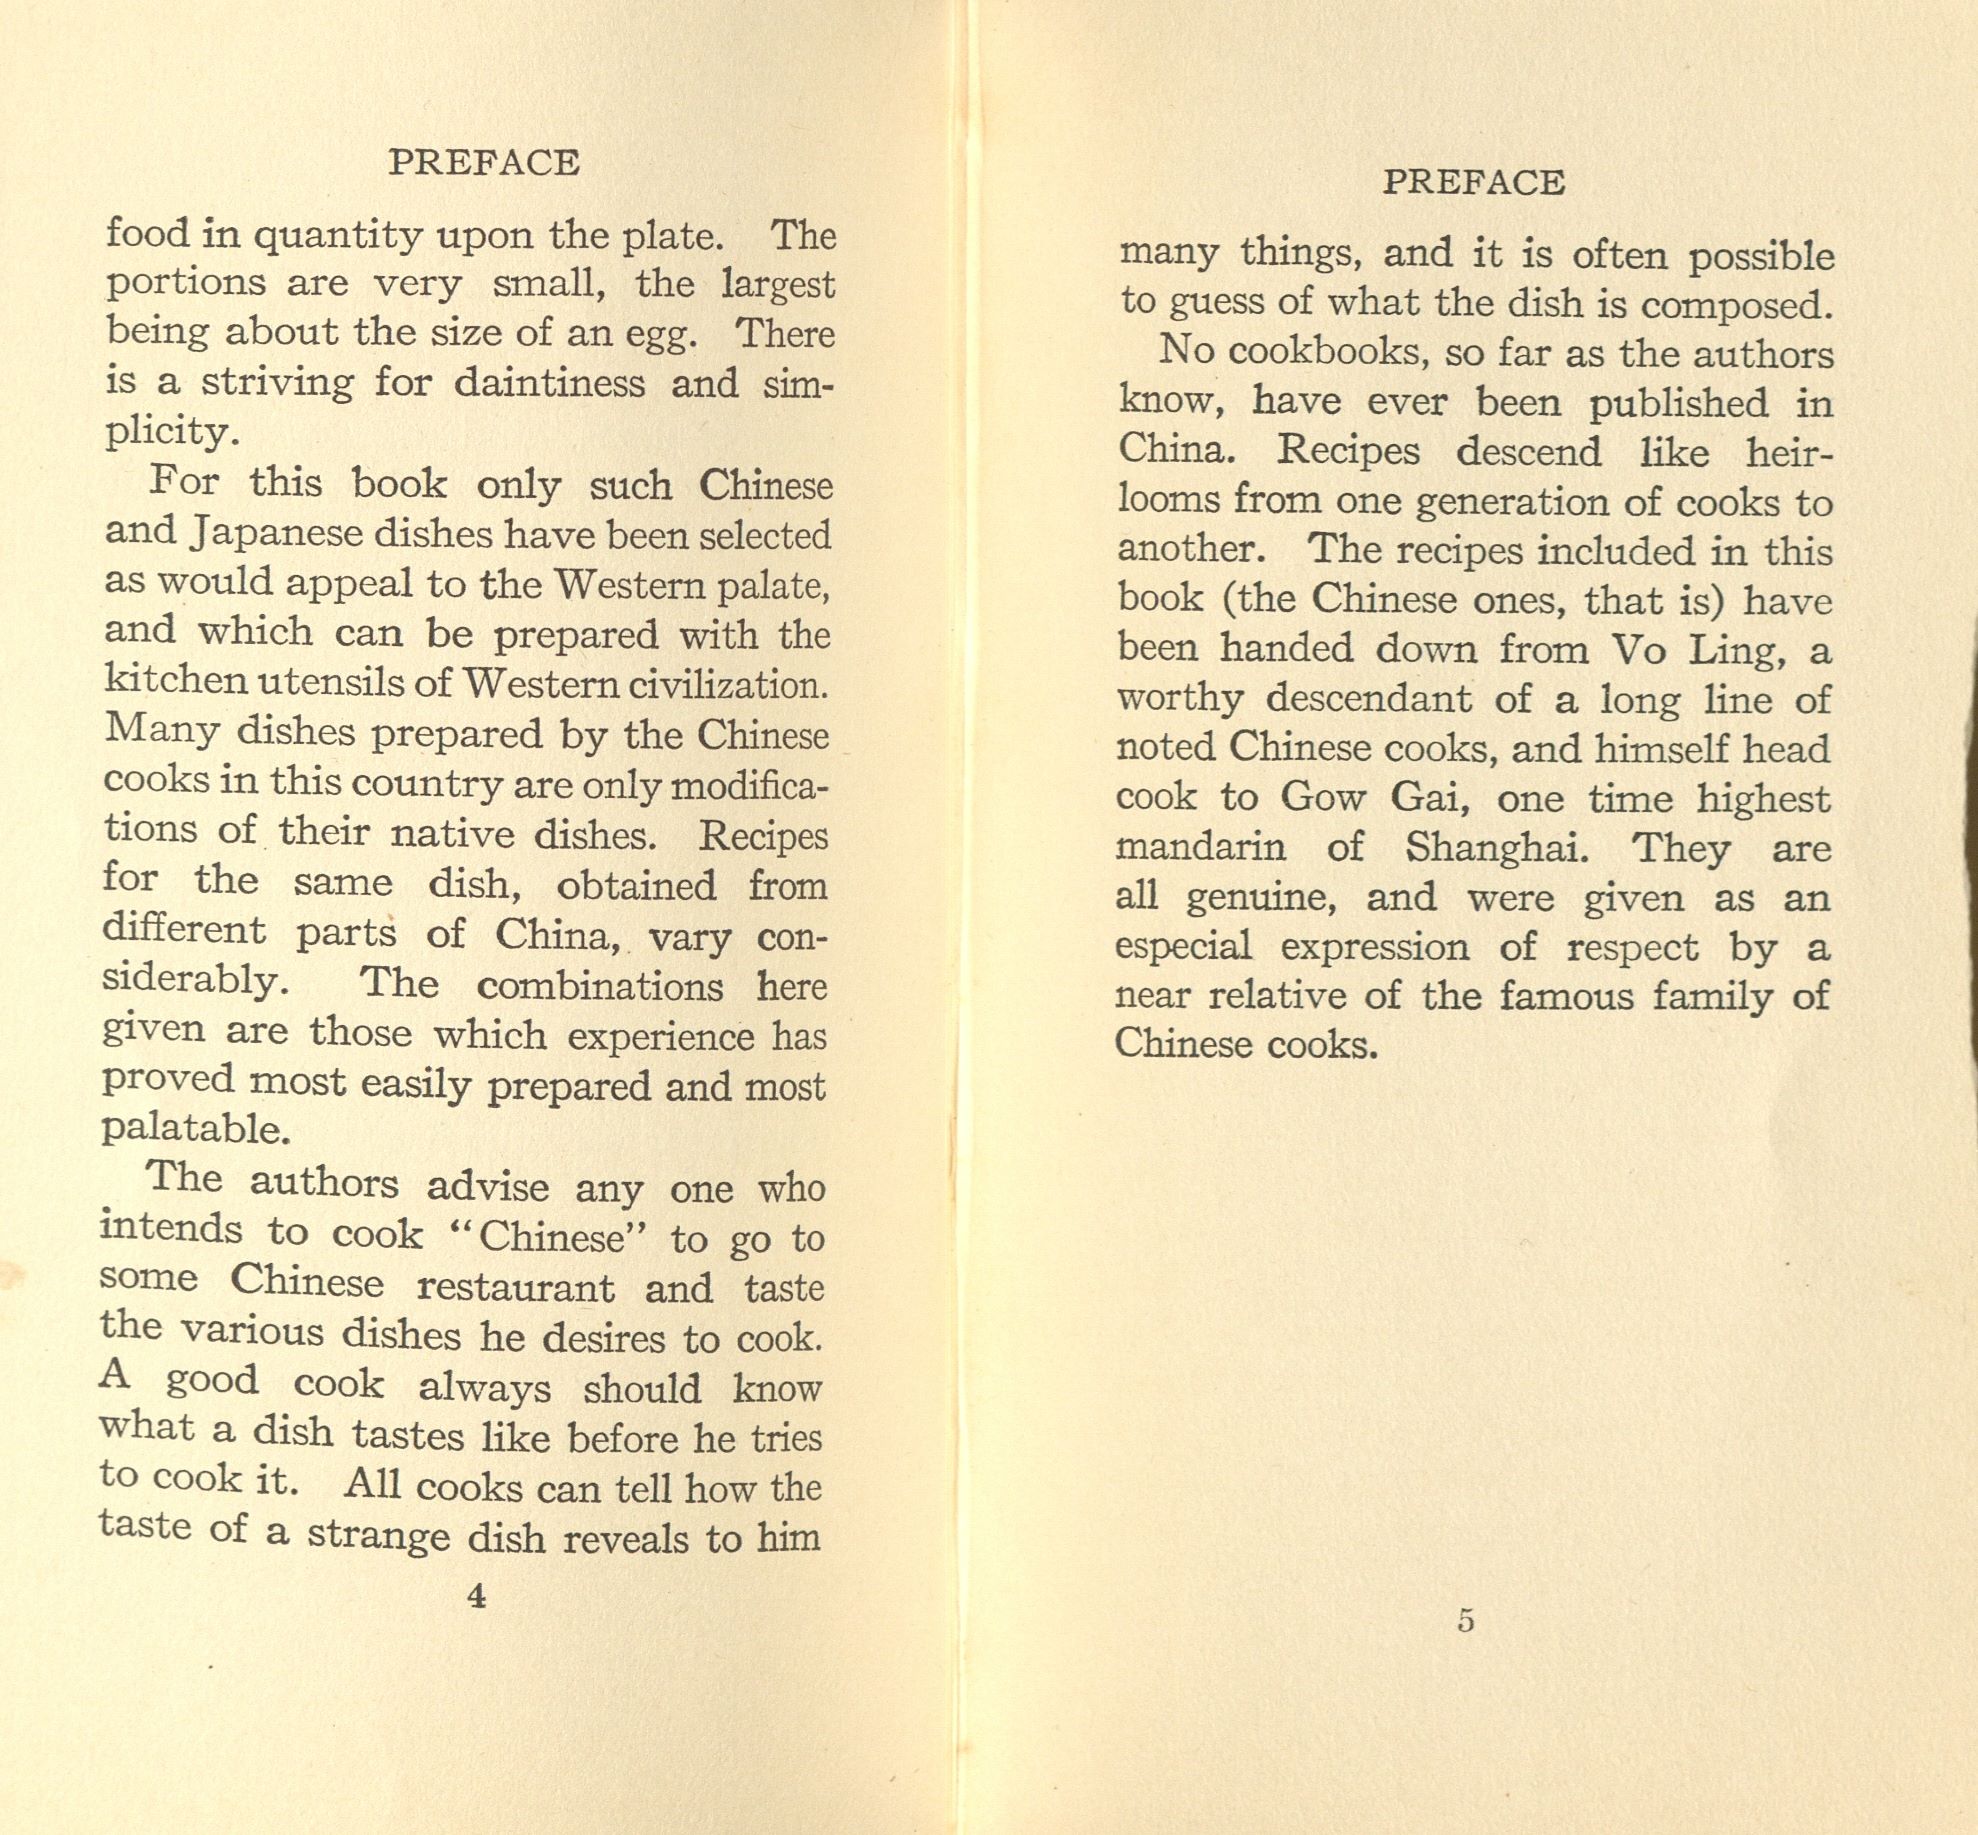 double-page spread of a portion of the preface